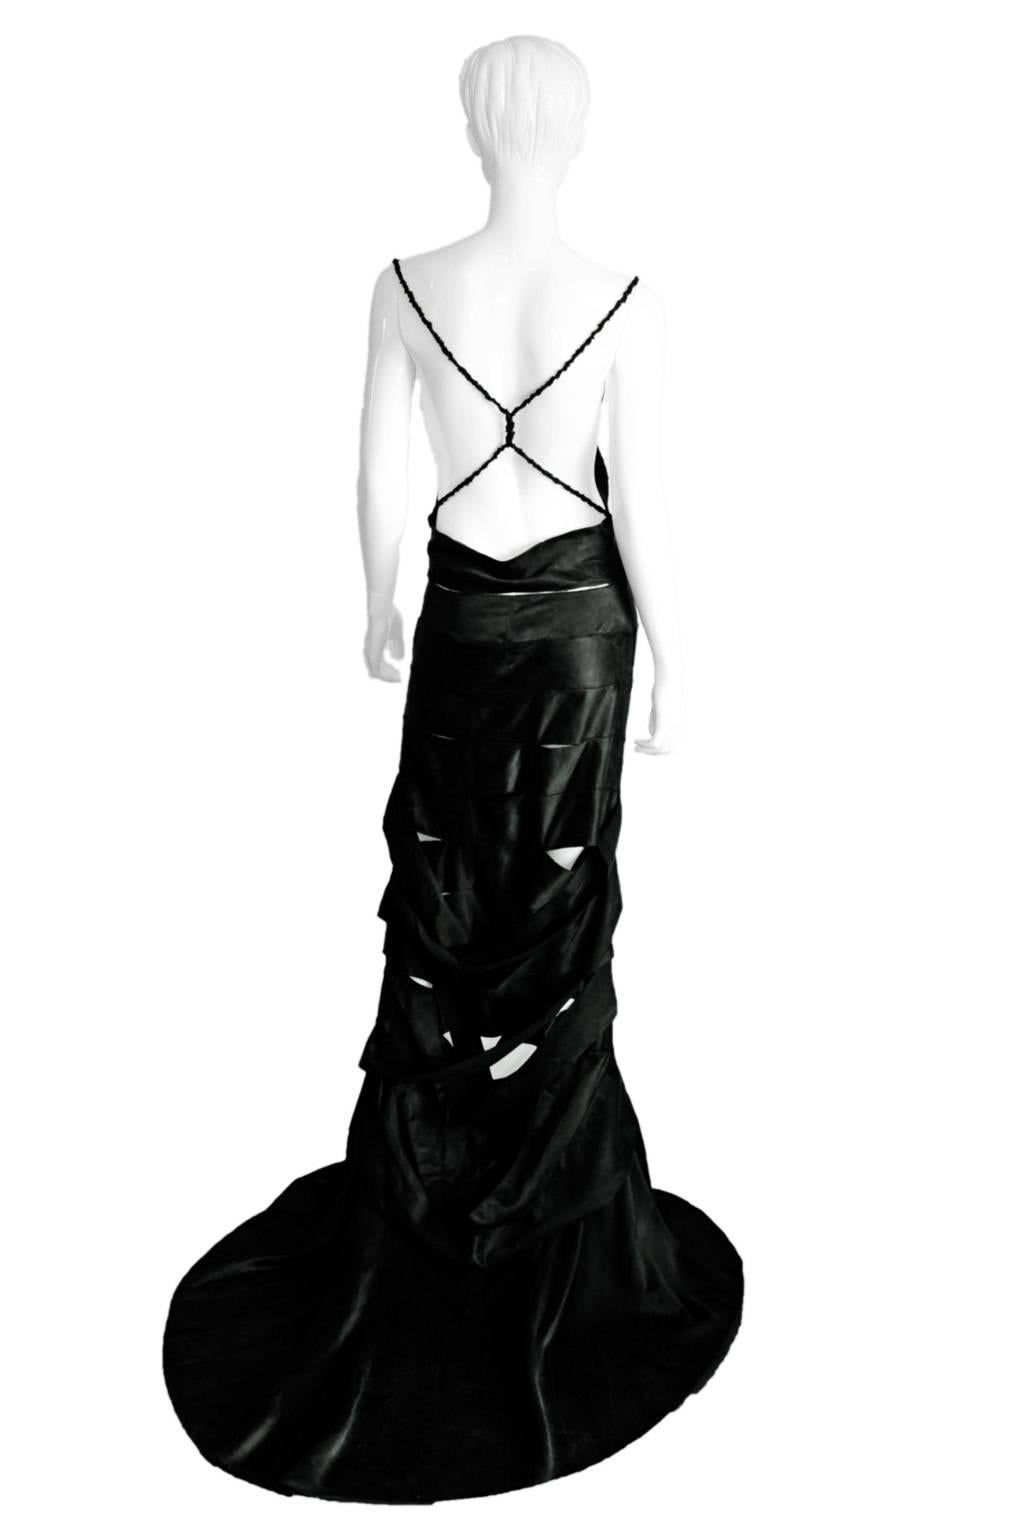 Incredible Tom Ford For Gucci Fall Winter 2002 Gothic Collection Black Silk Bandage Backless Runway Gown!

Who could ever forget Tom Ford's fall/winter 2002 Gothic Collection for Gucci... with that dark chinoiseriesque styling & heavenly